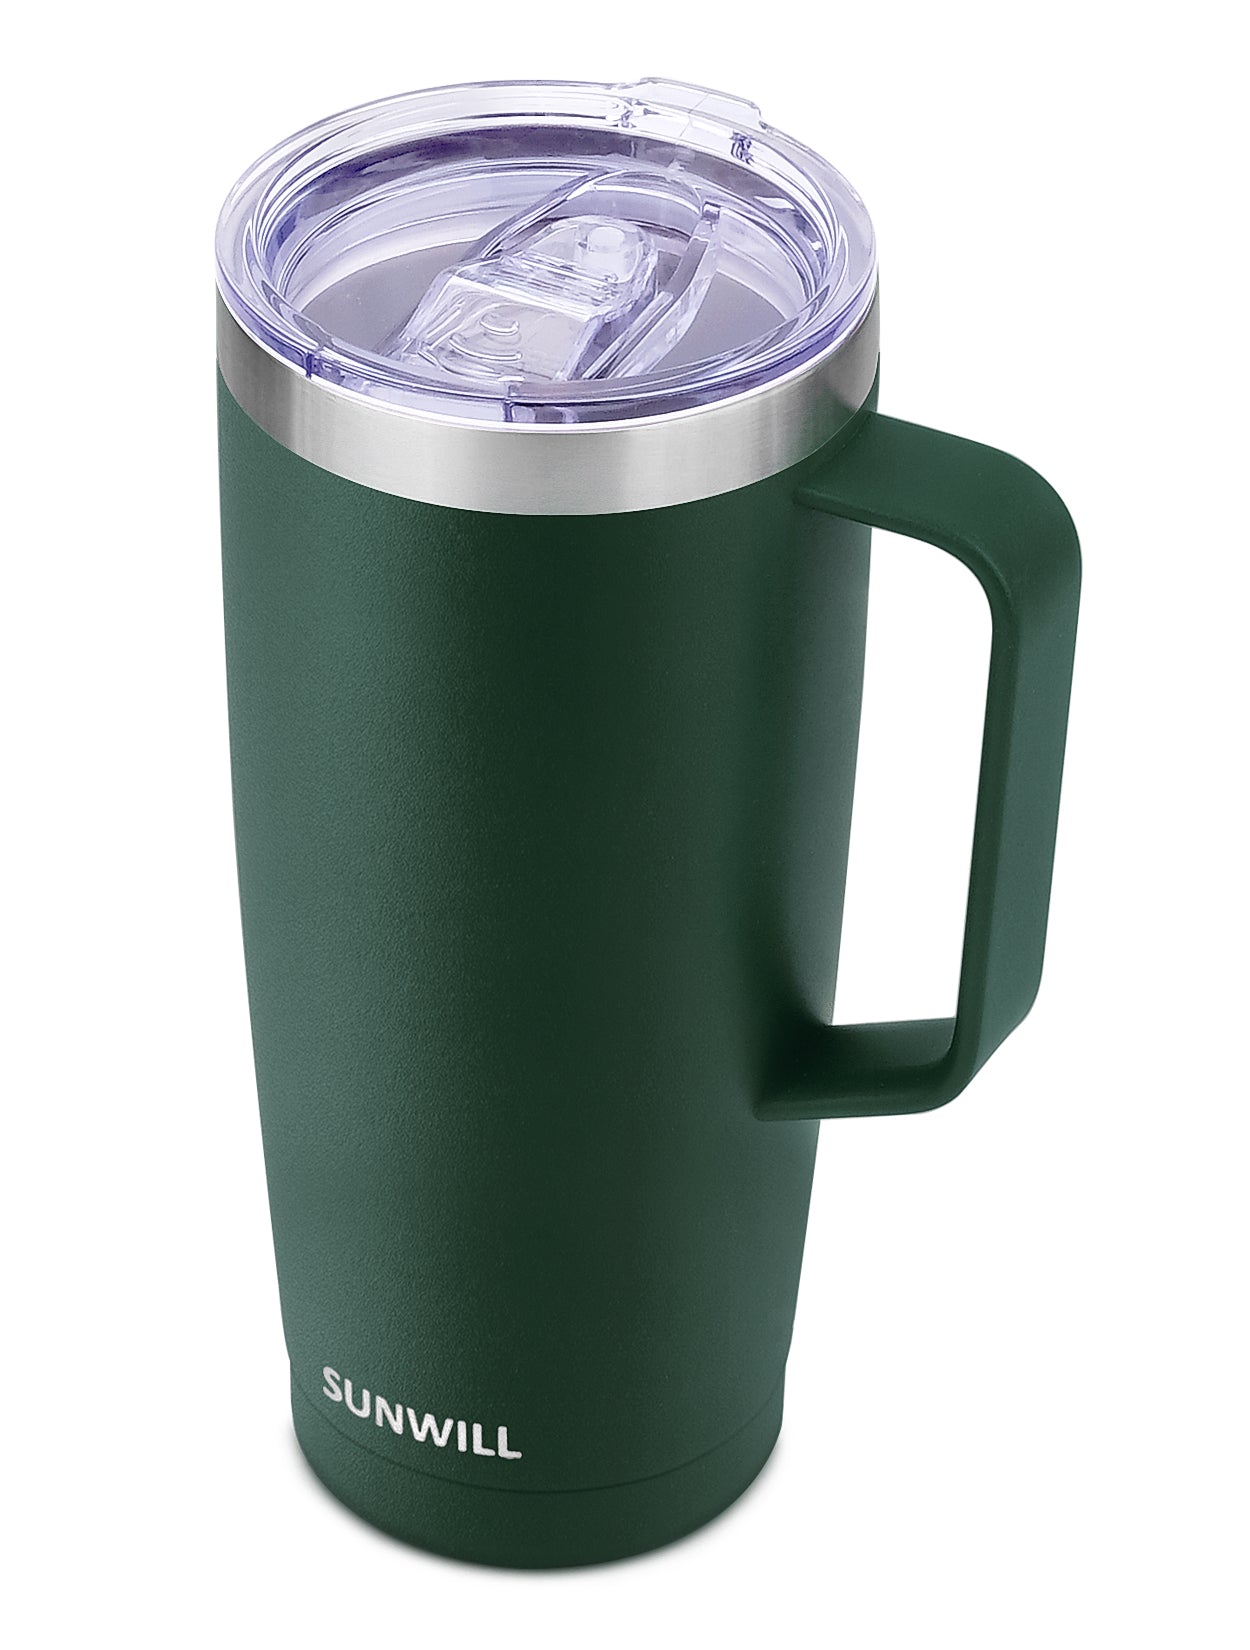  SUNWILL Coffee Mug with Handle, 14oz Insulated Stainless Steel  Reusable Coffee Cup, Double Wall Coffee Travel Mug, Powder Coated Forest  Green : Home & Kitchen